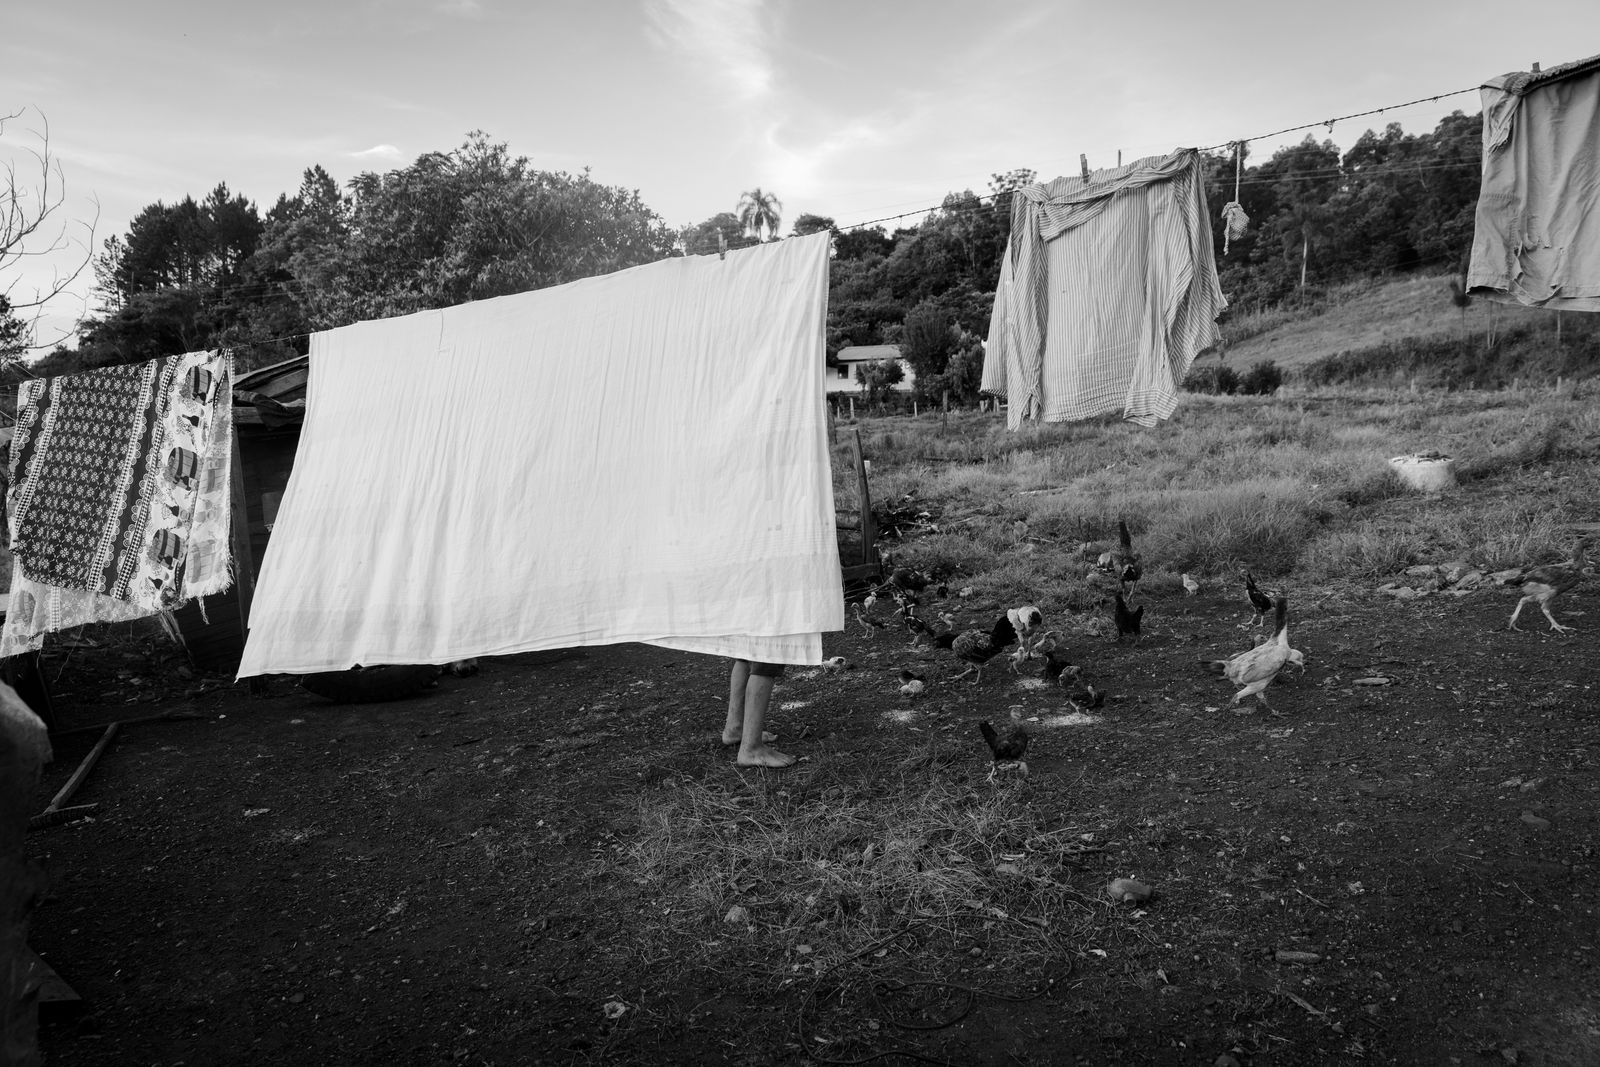 © Mercedes Cotoli - Dali waits patiently behind a bed sheet to catch a chicken for dinner.